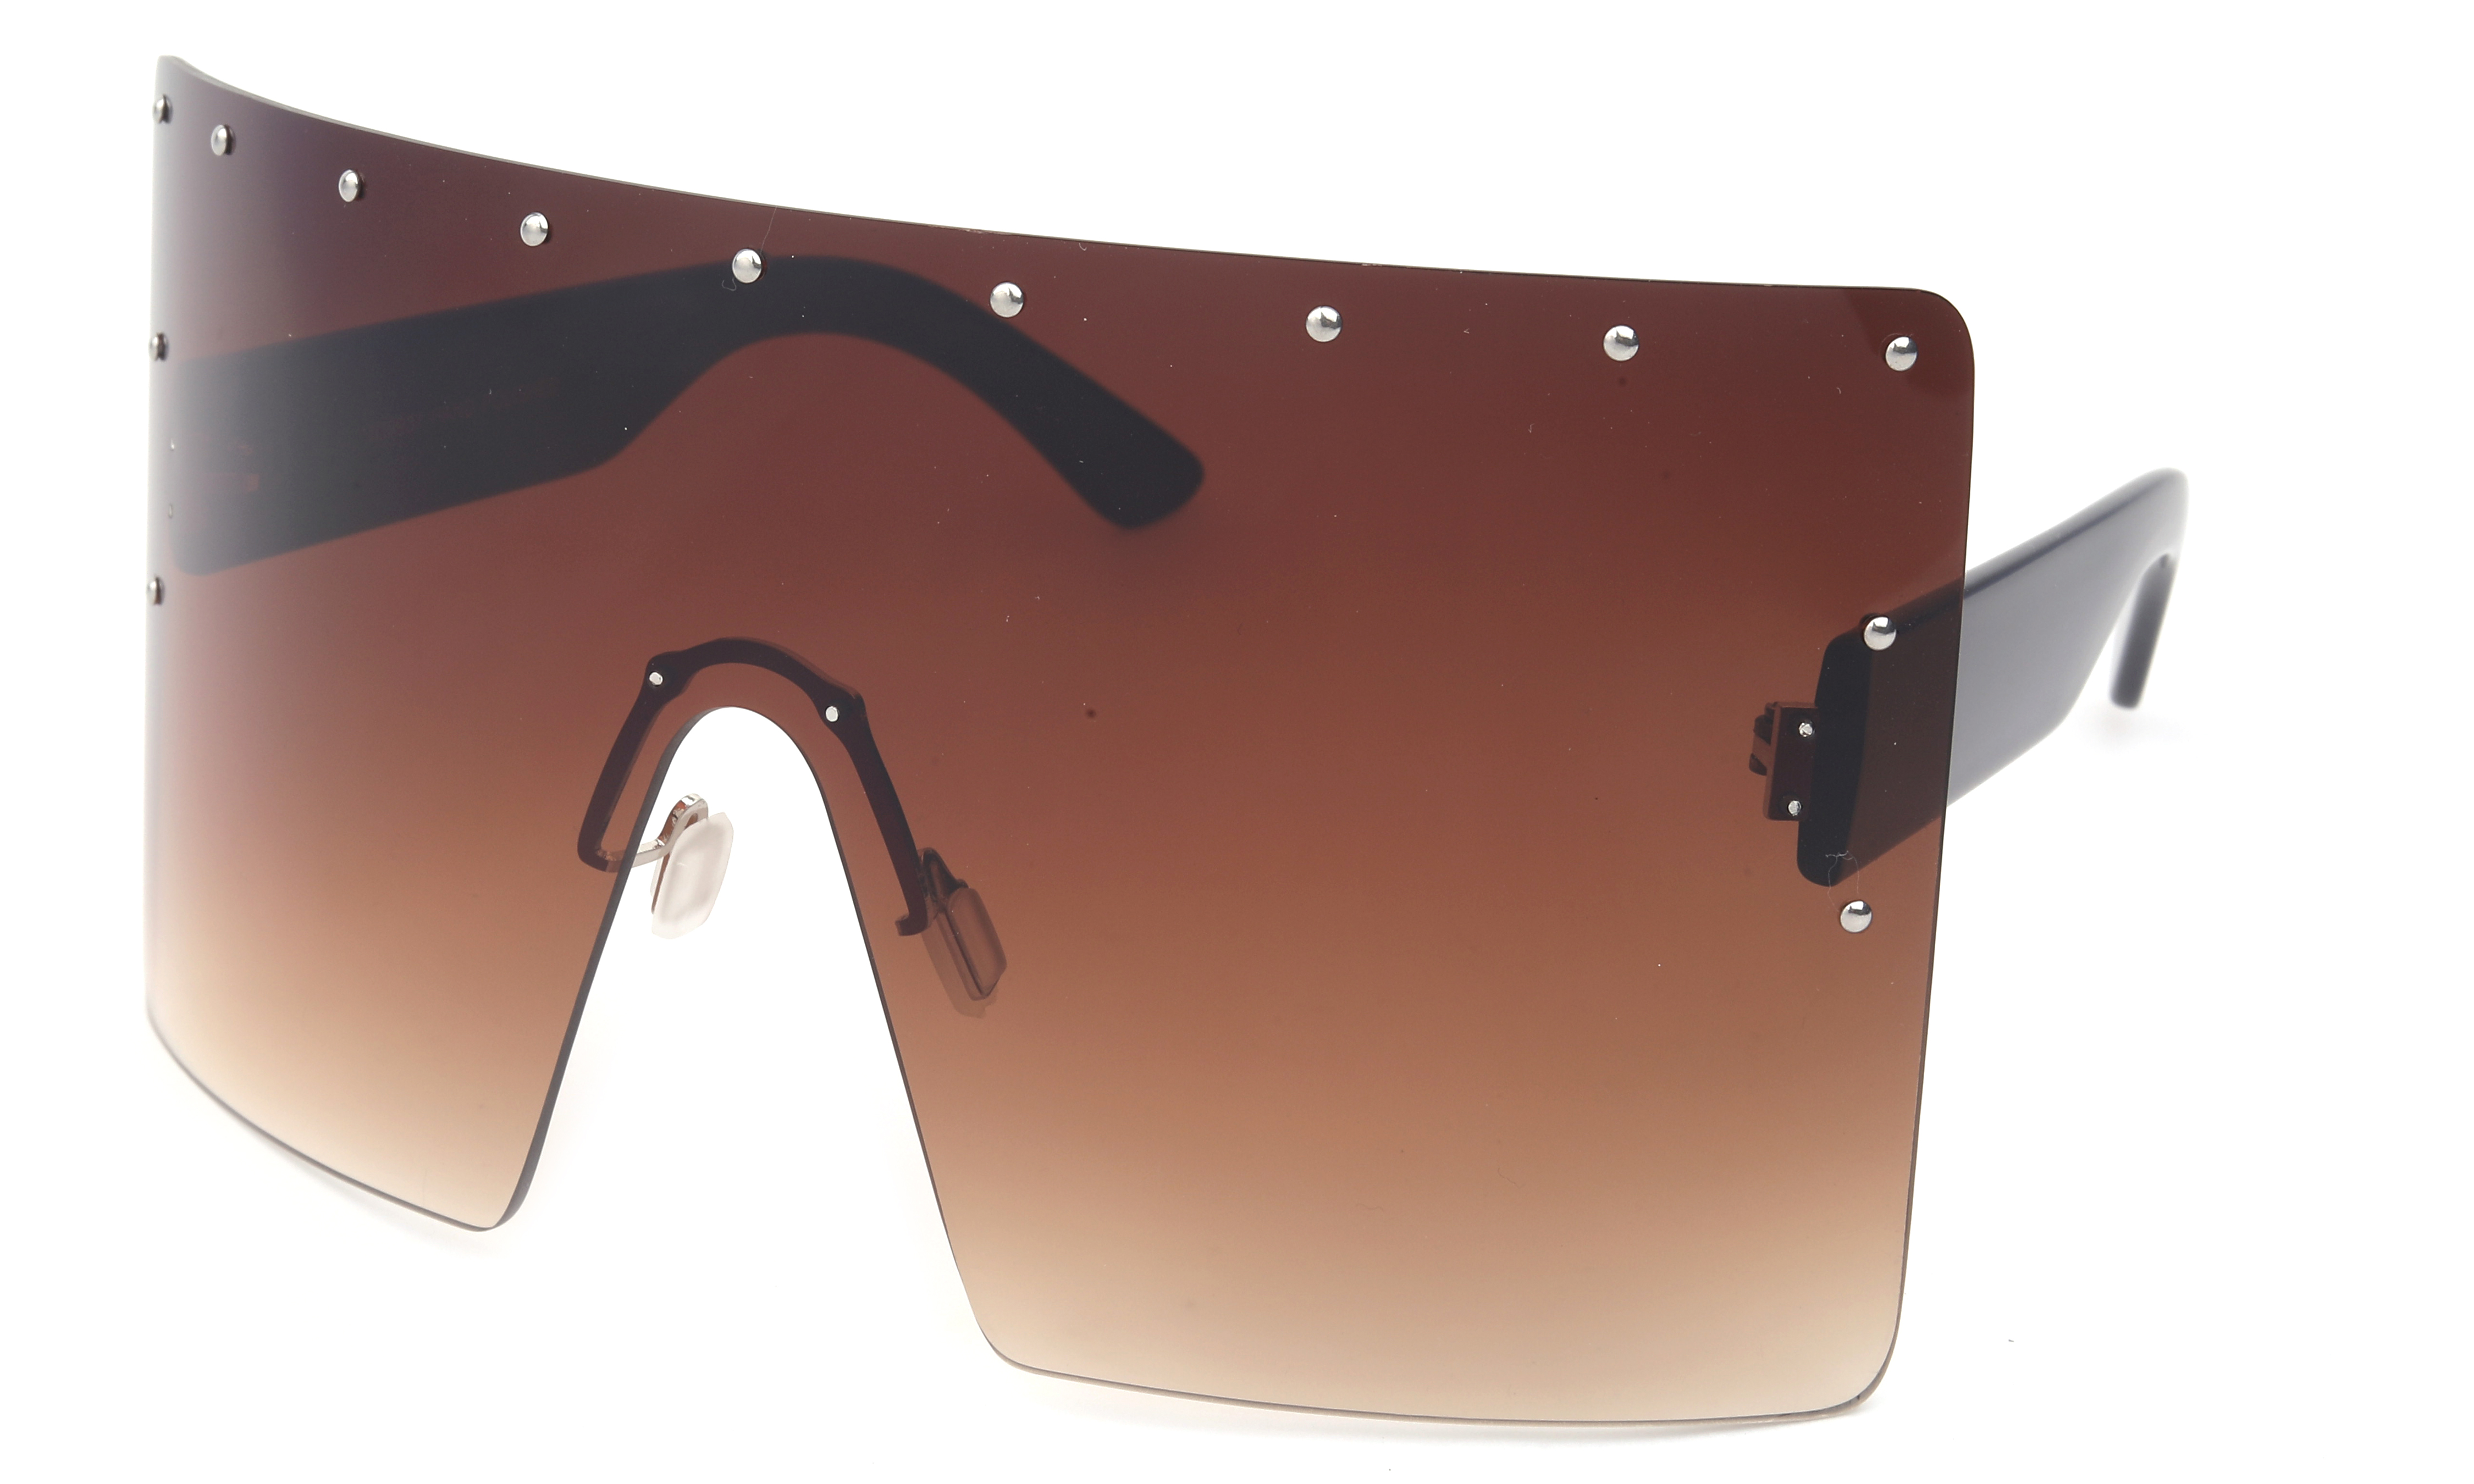 Newbee Fashion One Piece Lens Oversized Square Rimless Large Fashion Sunglasses for Women, 7*3.25 inches Rectangle Flat Top Face Shield, Pins Decorations, UV 400 Gradient Brown Lens - image 1 of 2